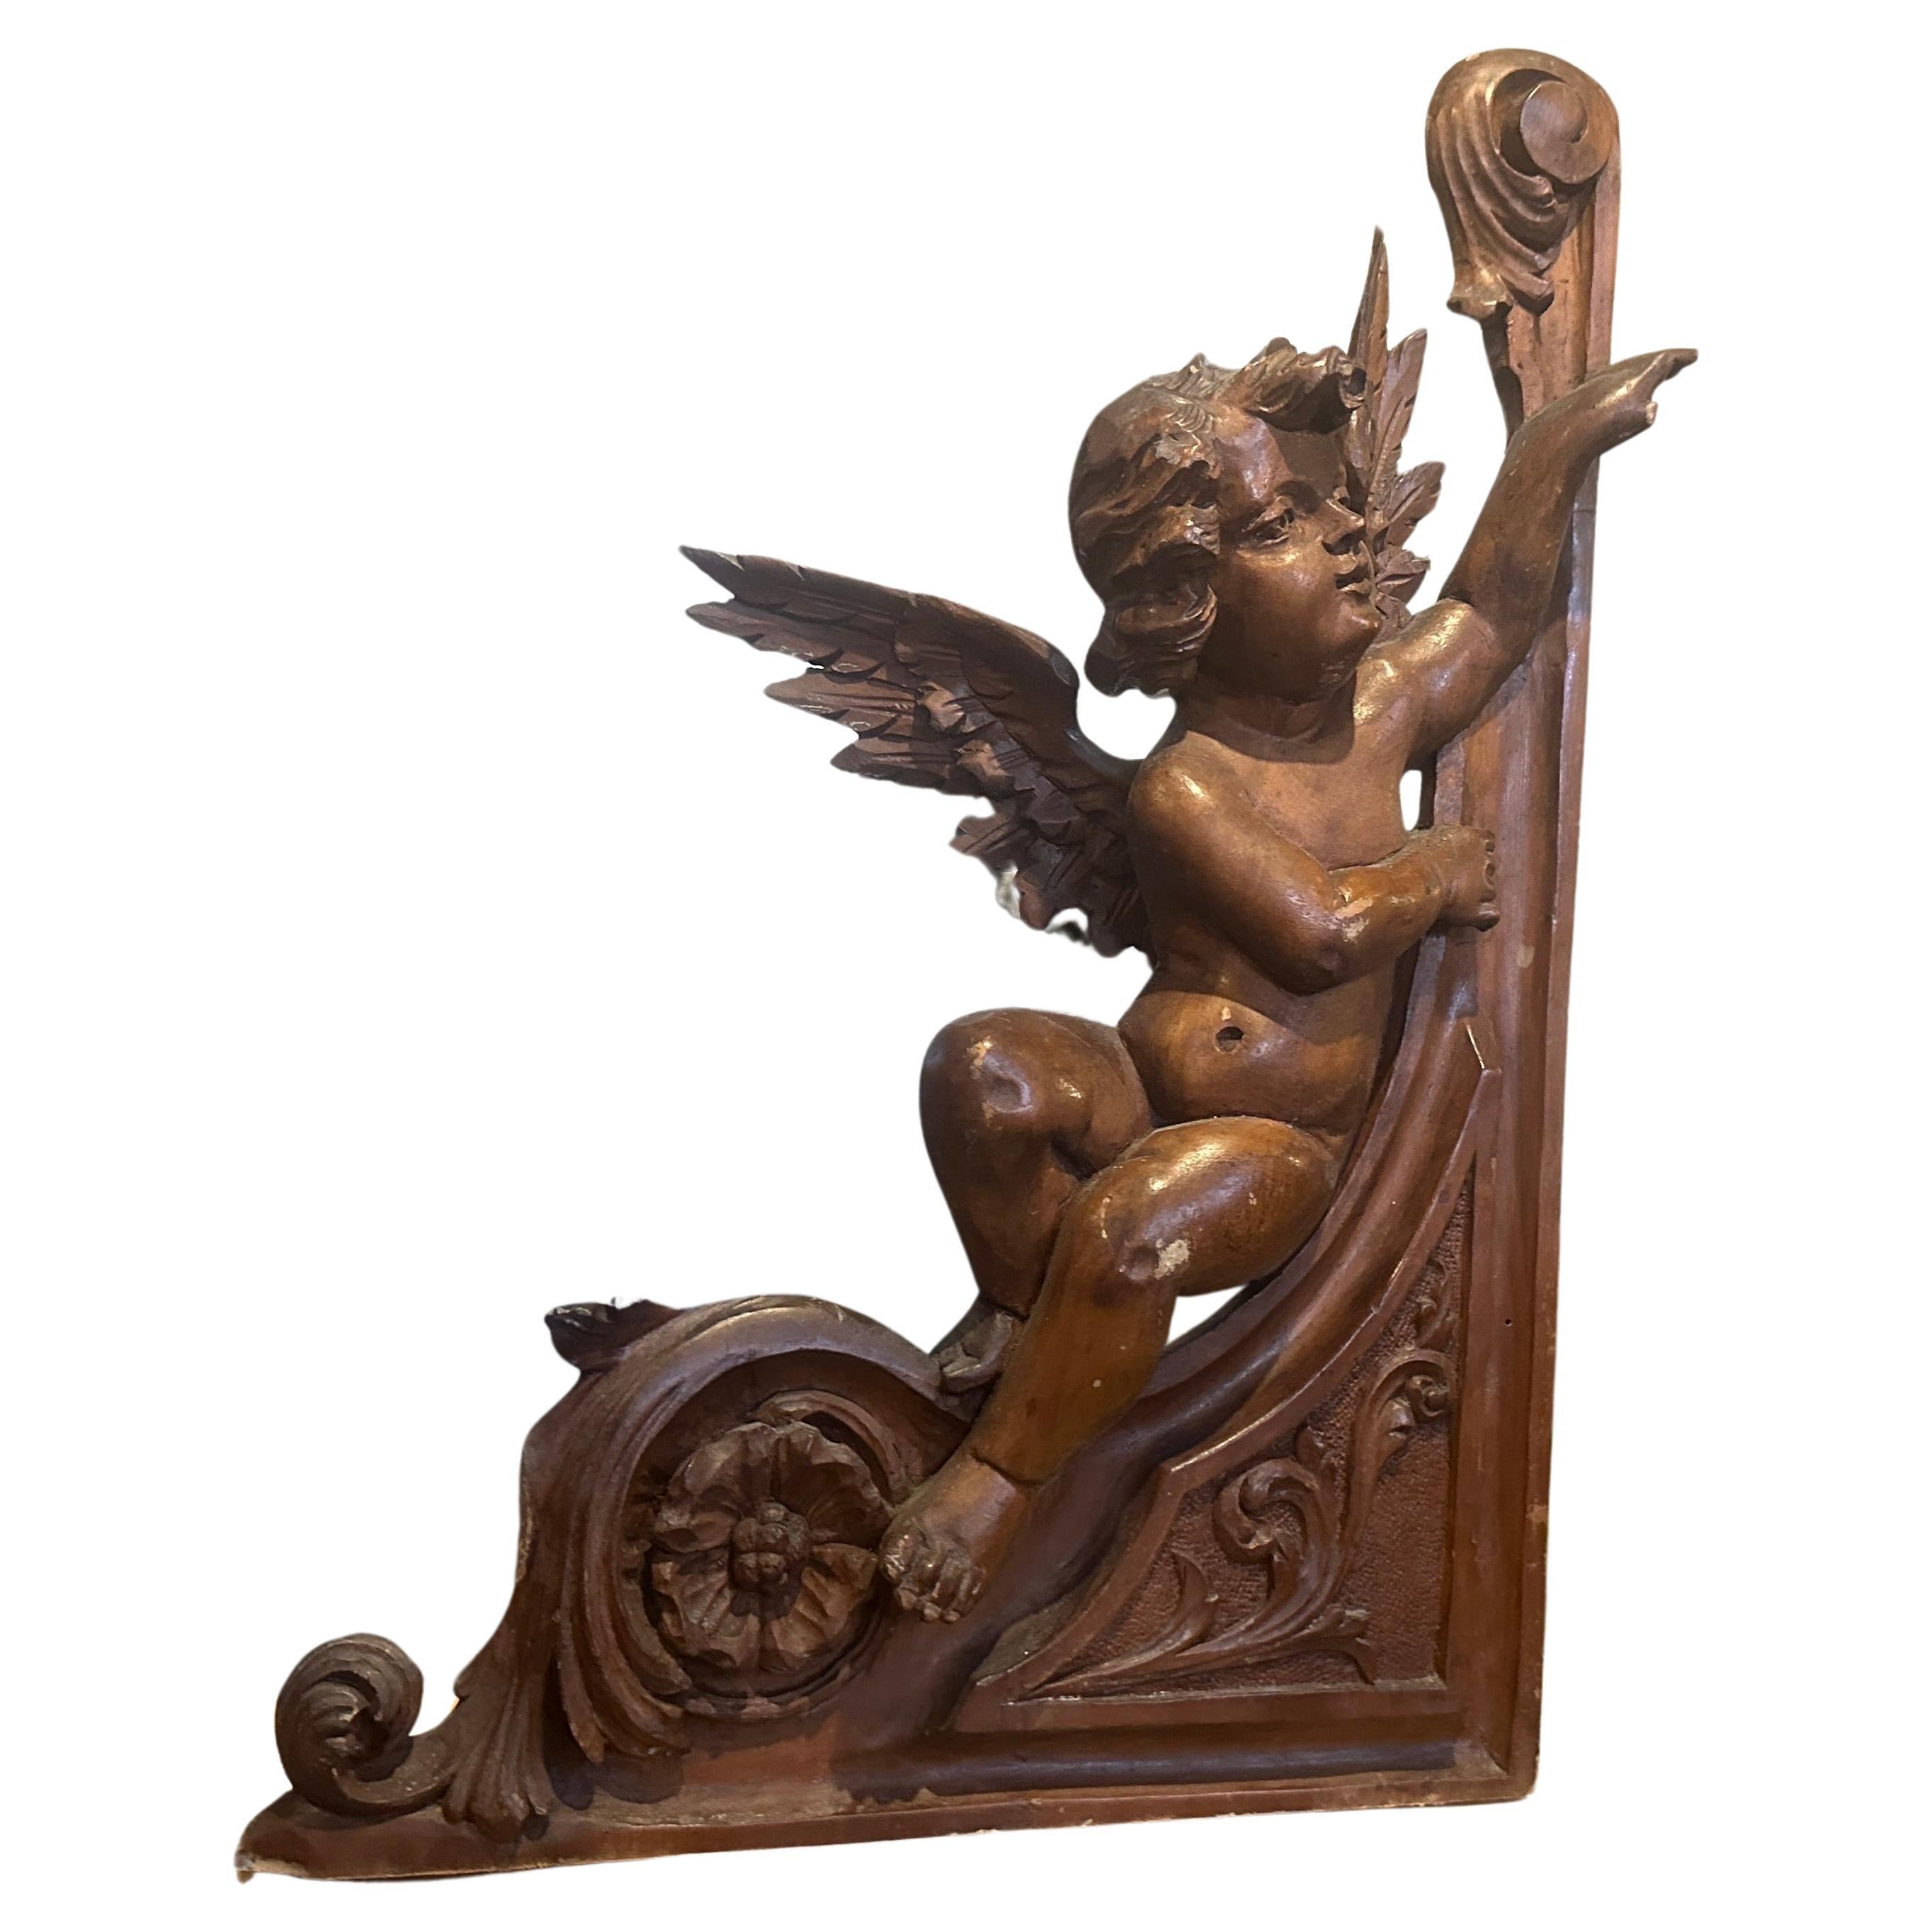 This art nouveau sicilian carving it was part of a larger composition from a piece of furniture, it's in original very good conditions. The walnut wood has been a suitable choice for its warm tones and fine grain. The angel fragment features sinuous